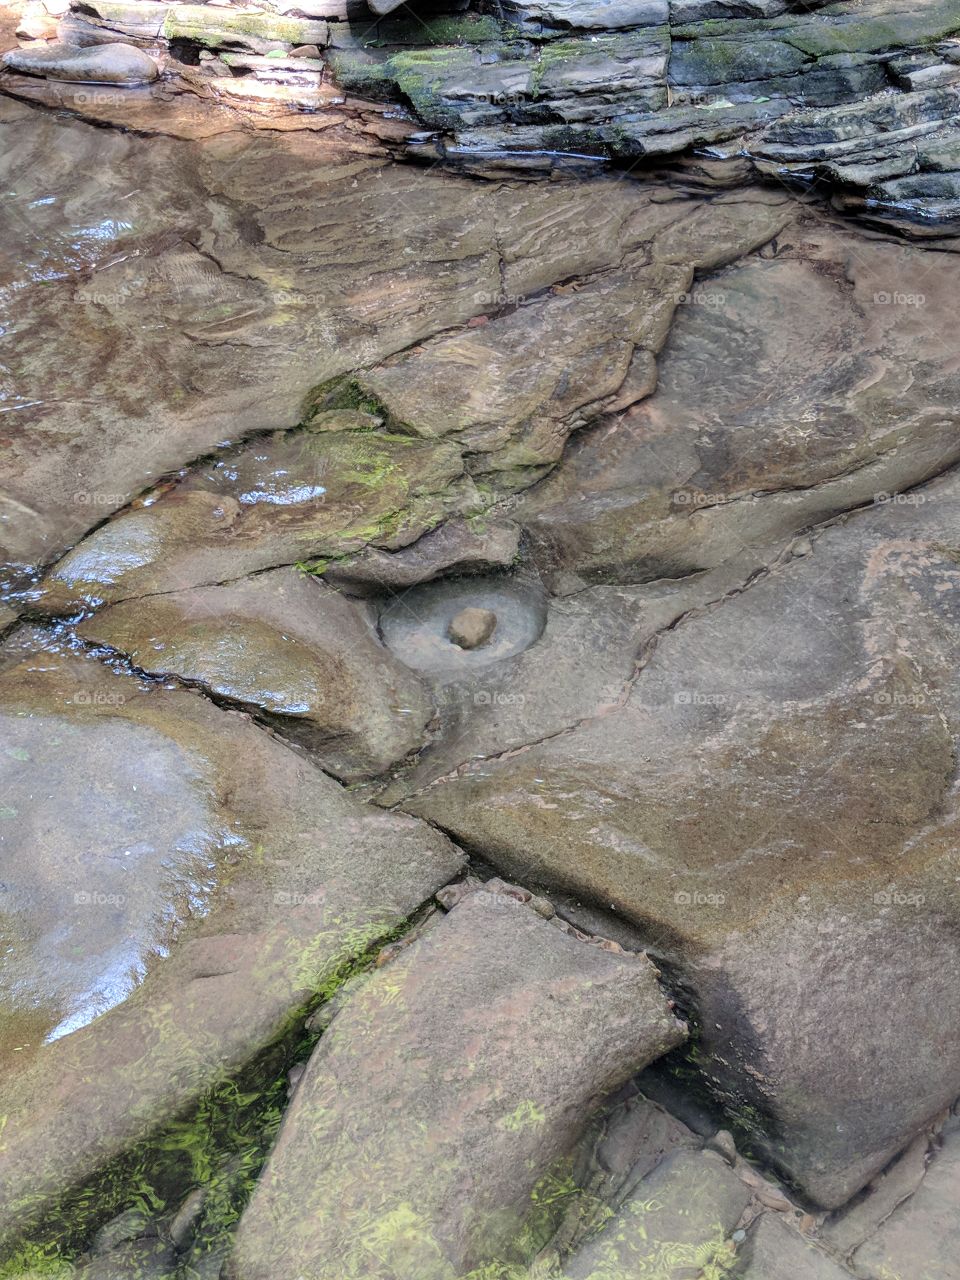 Perfectly shaped scour hole under cold rushing water.